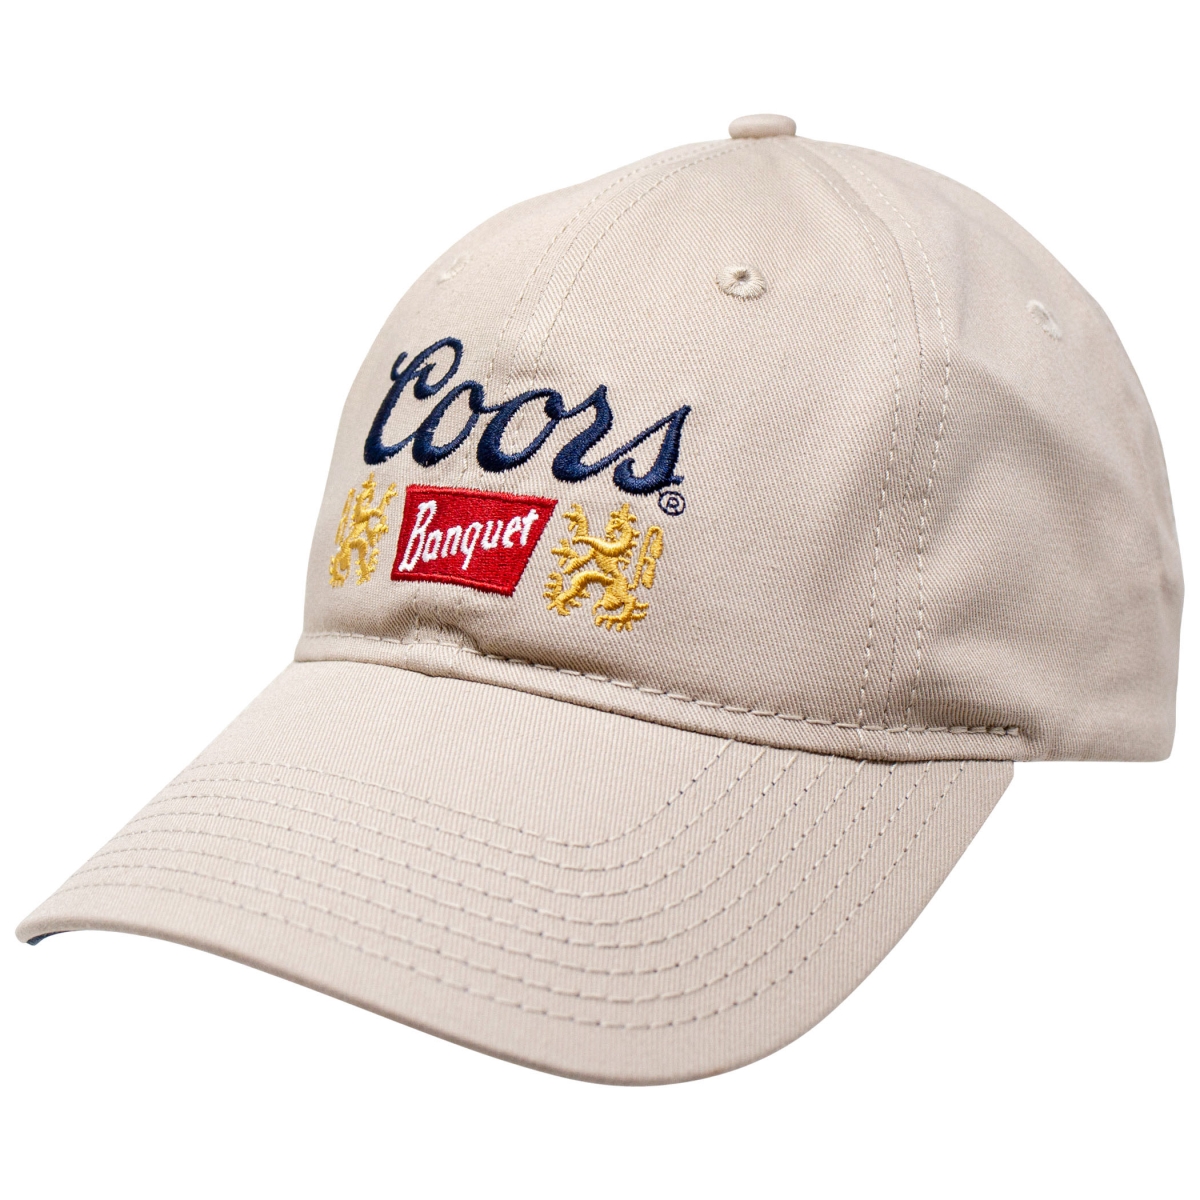 Picture of Coors 795557 Coors Banquet Beer Logo Adjustable Khaki Hat